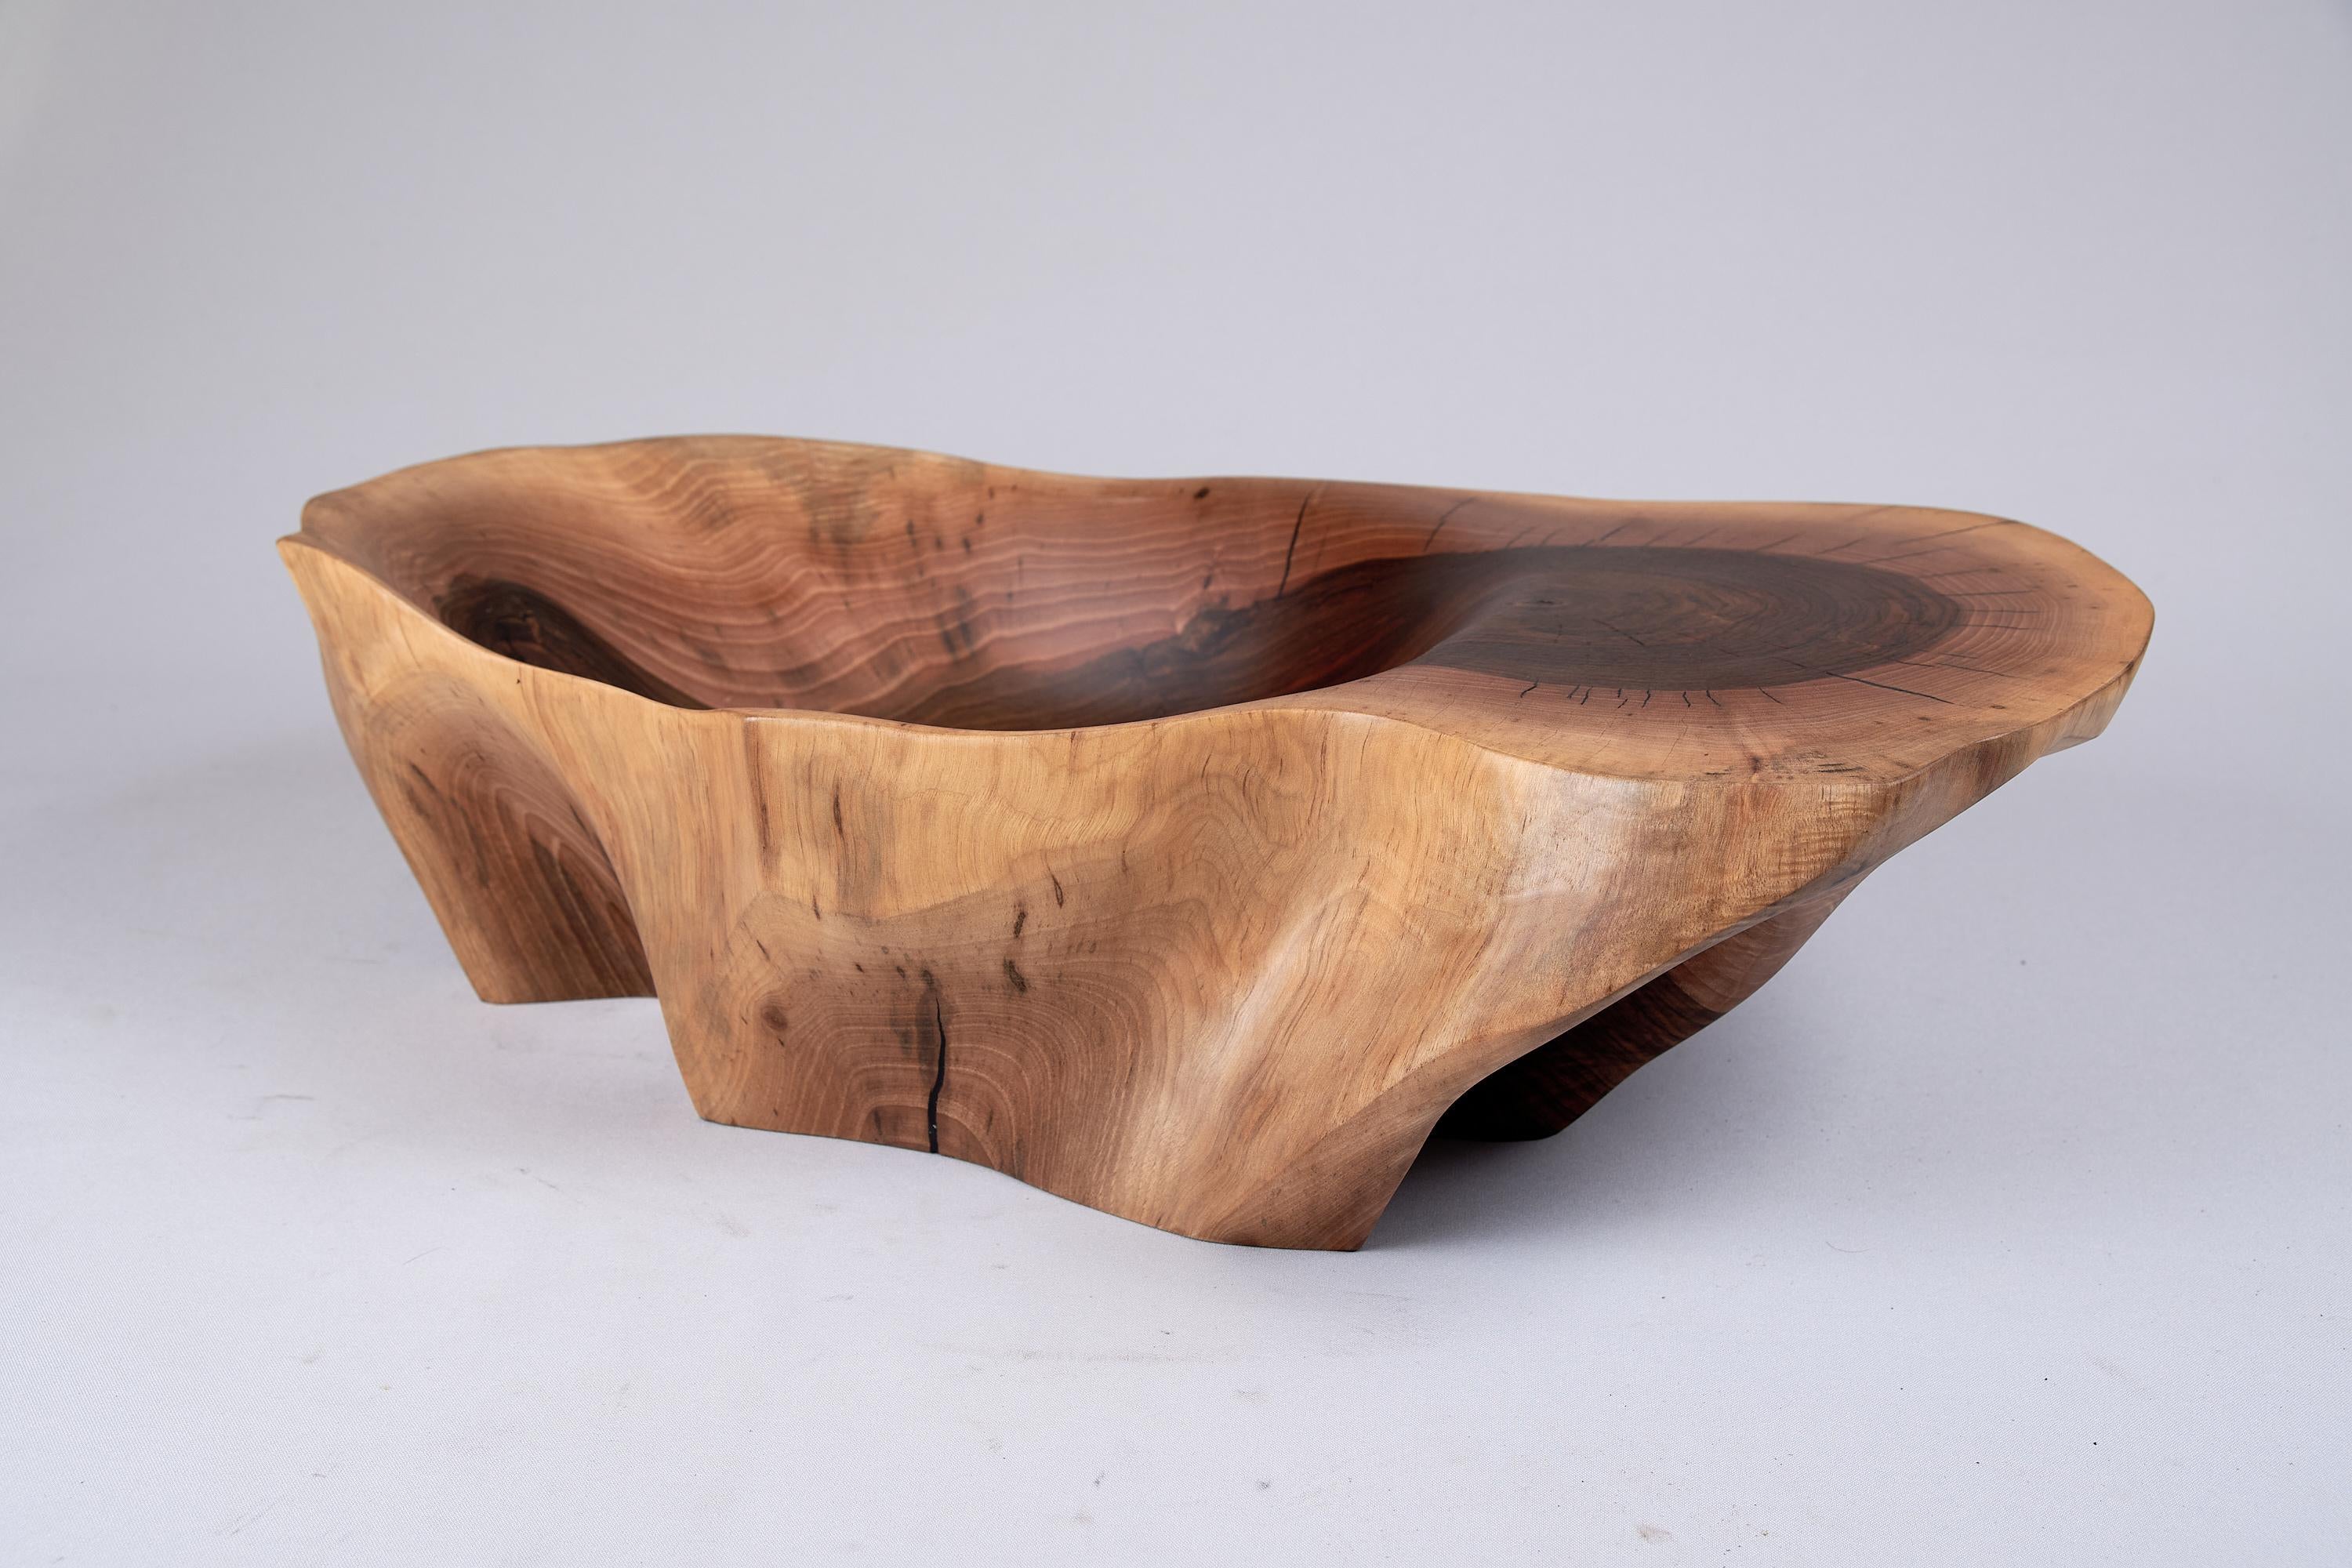 Unique handmade wooden sink carved by artist from single piece of wood with basic carving tools, easy maintaining and endurance. Great for any interior, whether it be modern or rustic, it will fit perfectly and leave everyone breathless.

Ready To